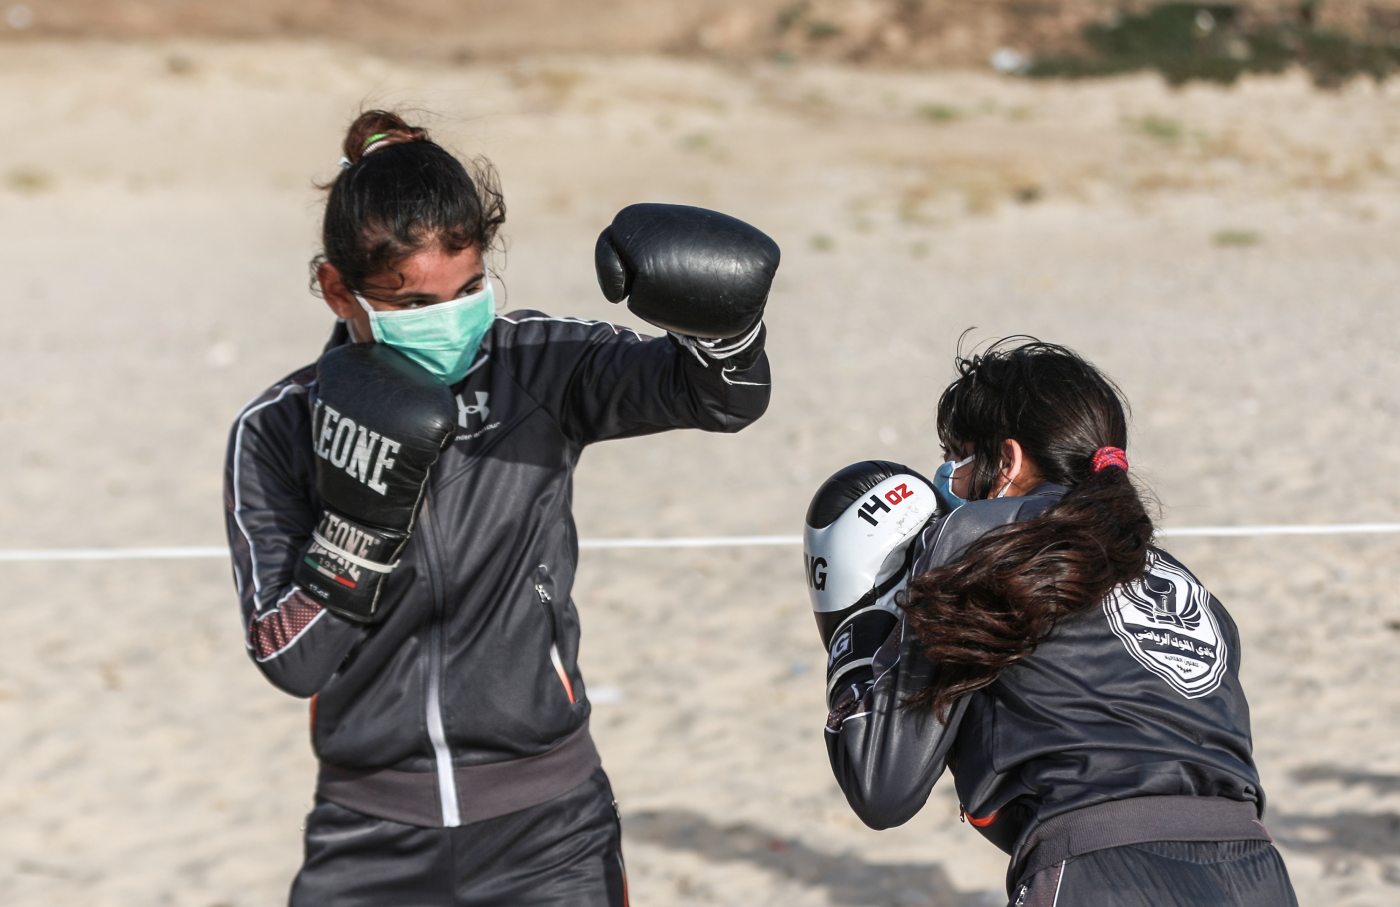 A Women’s Boxing Team Grows in Gaza